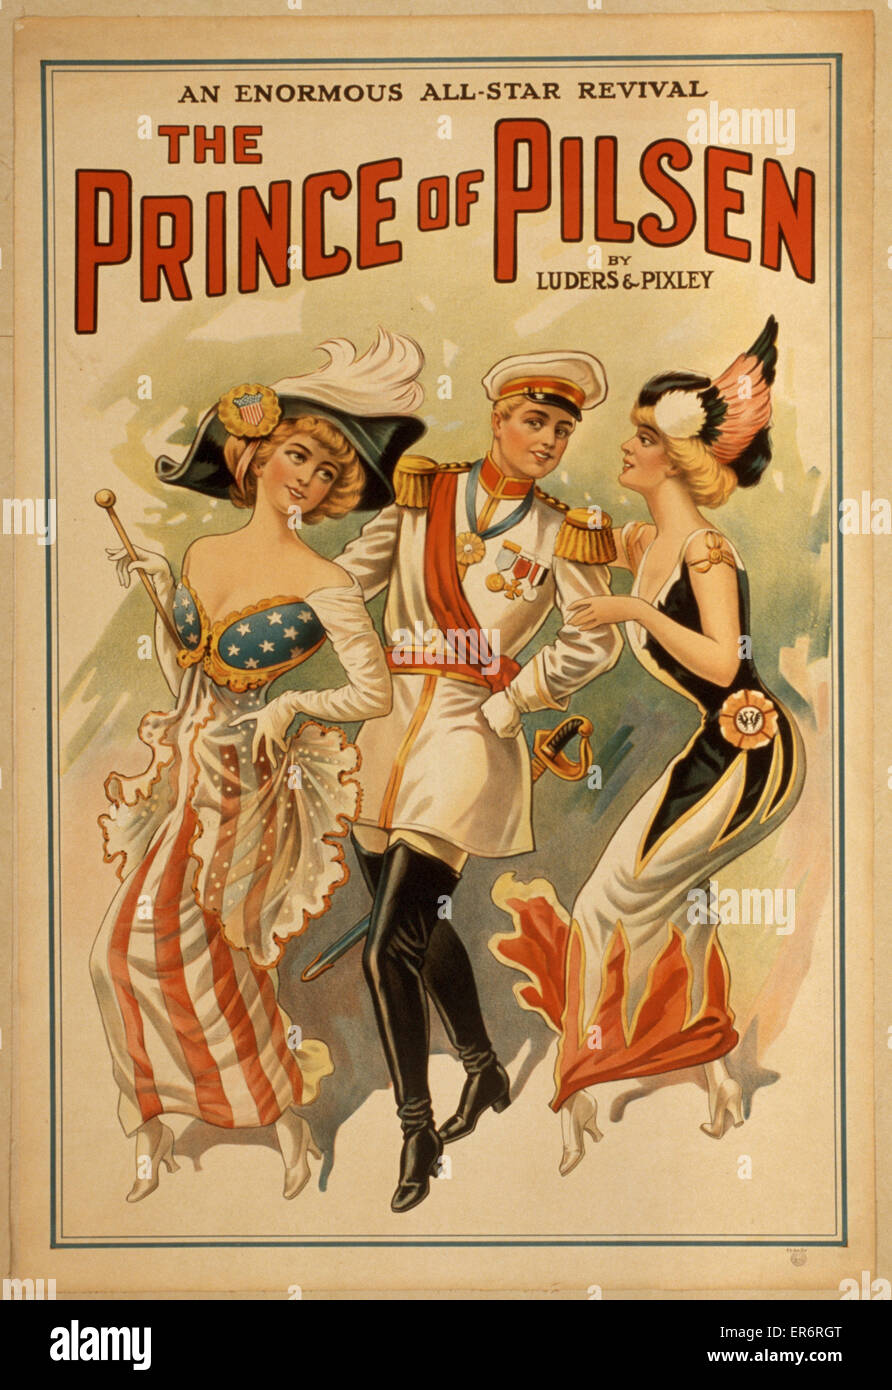 The Prince of Pilsen by Luders &amp; Pixley : an enormous all-star revival. Date 19 - ?. Stock Photo